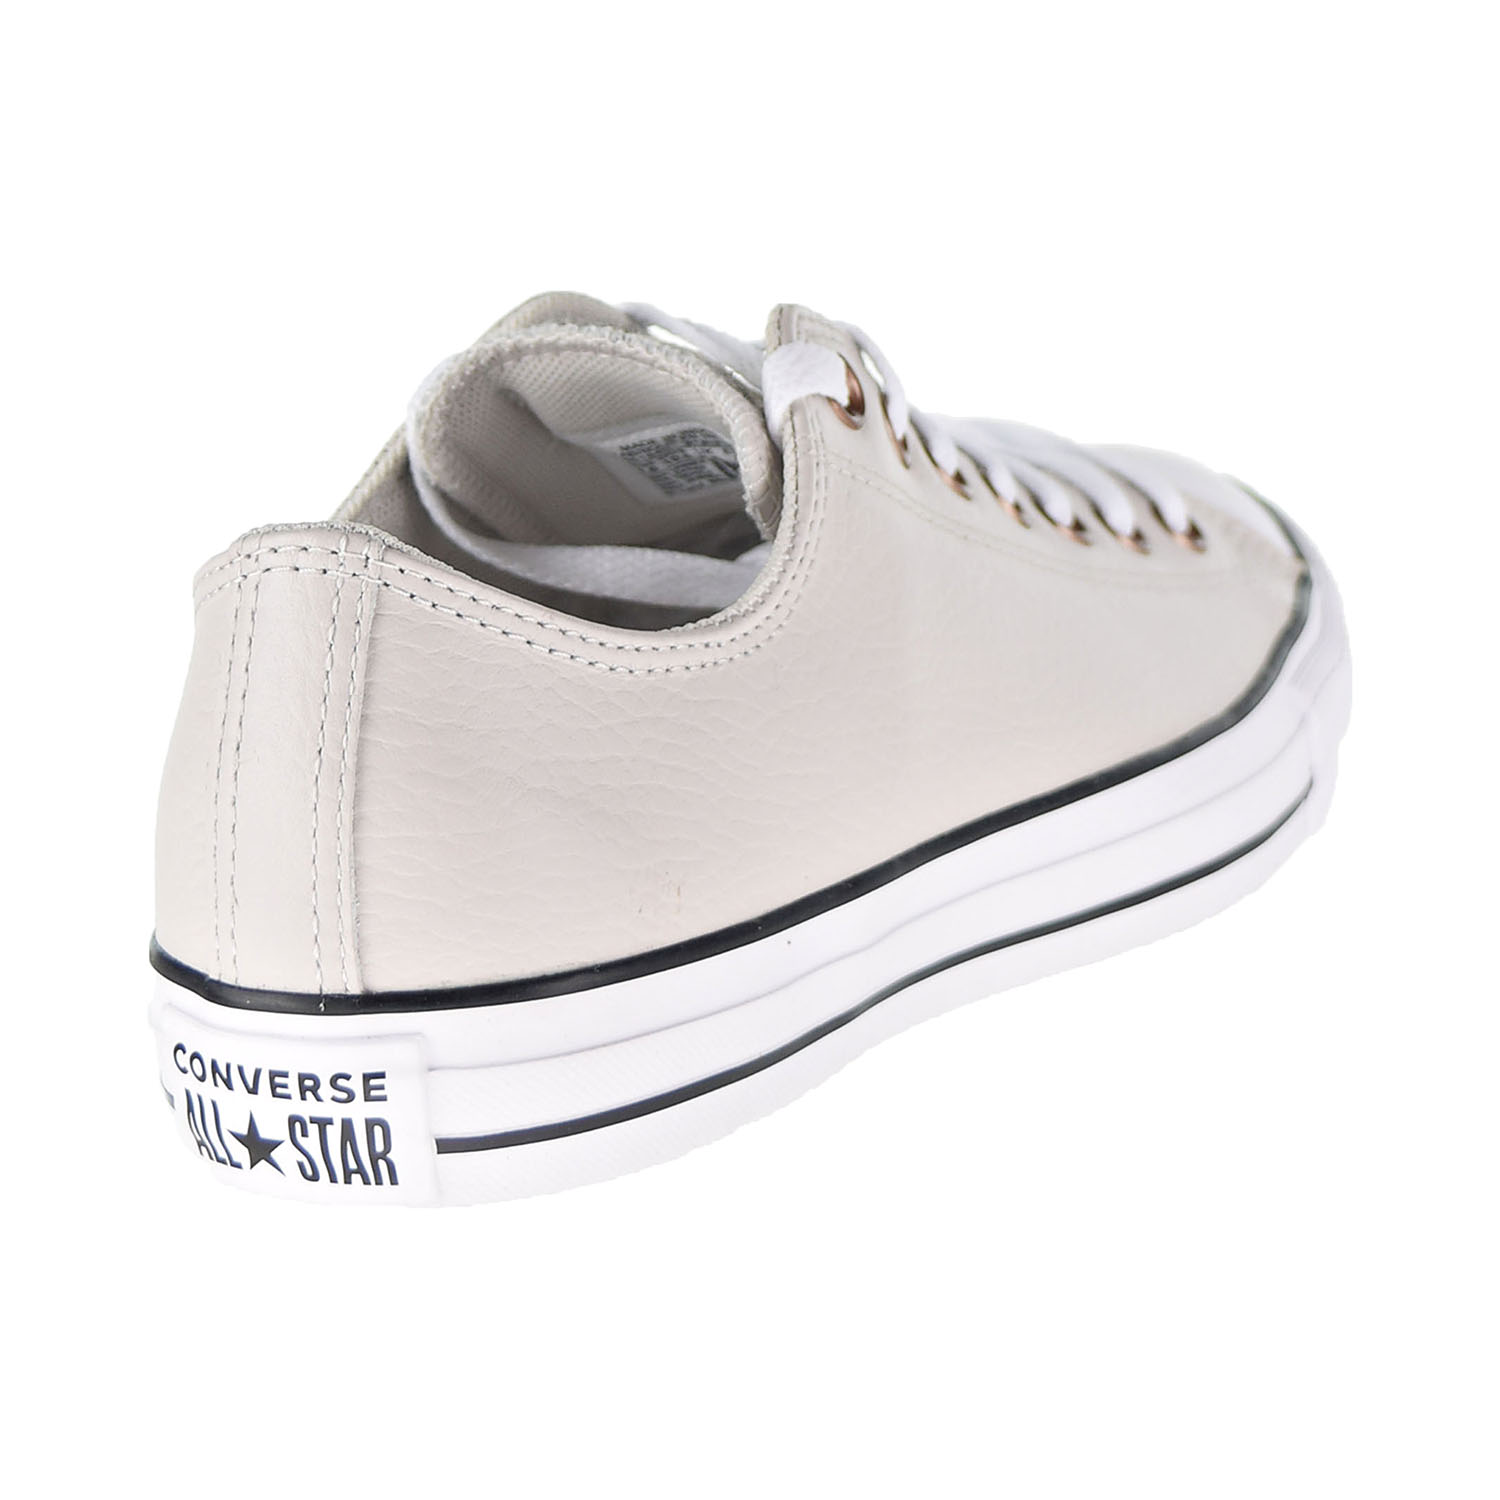 Converse Chuck Taylor All Star Ox Men's Shoes Pale Putty-White-Black 165194c - image 3 of 6